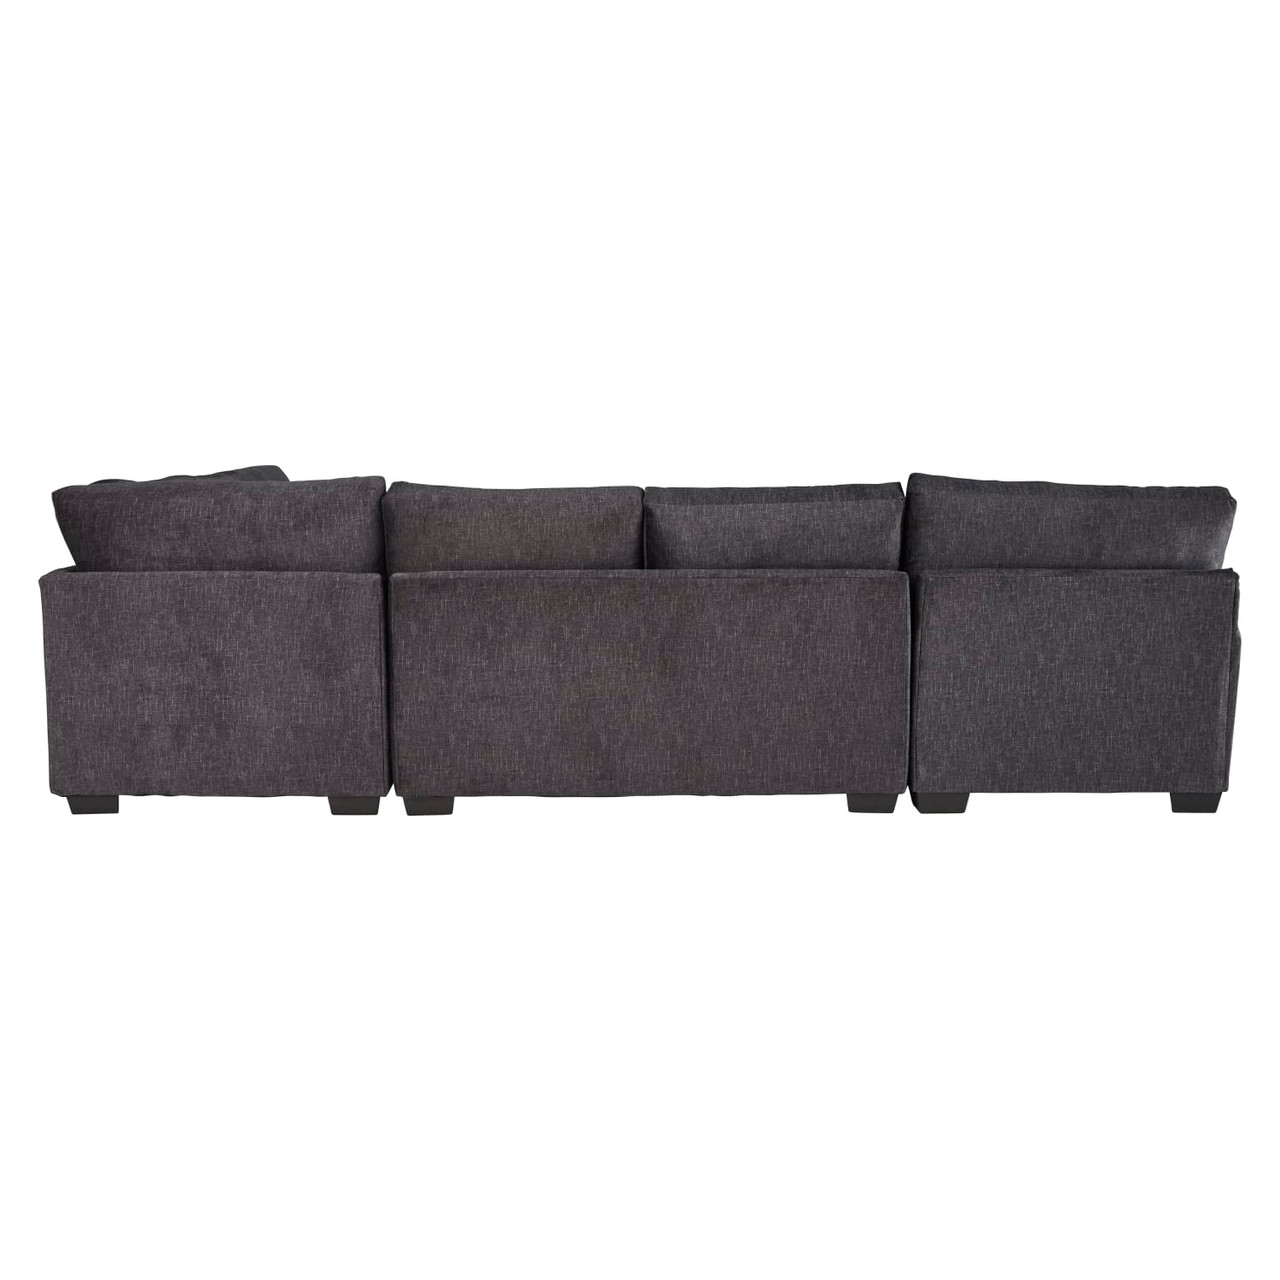 Boulevard Sectional - Right Side Facing Corner Sofa, Armless Loveseat, and Left Side Facing Chaise